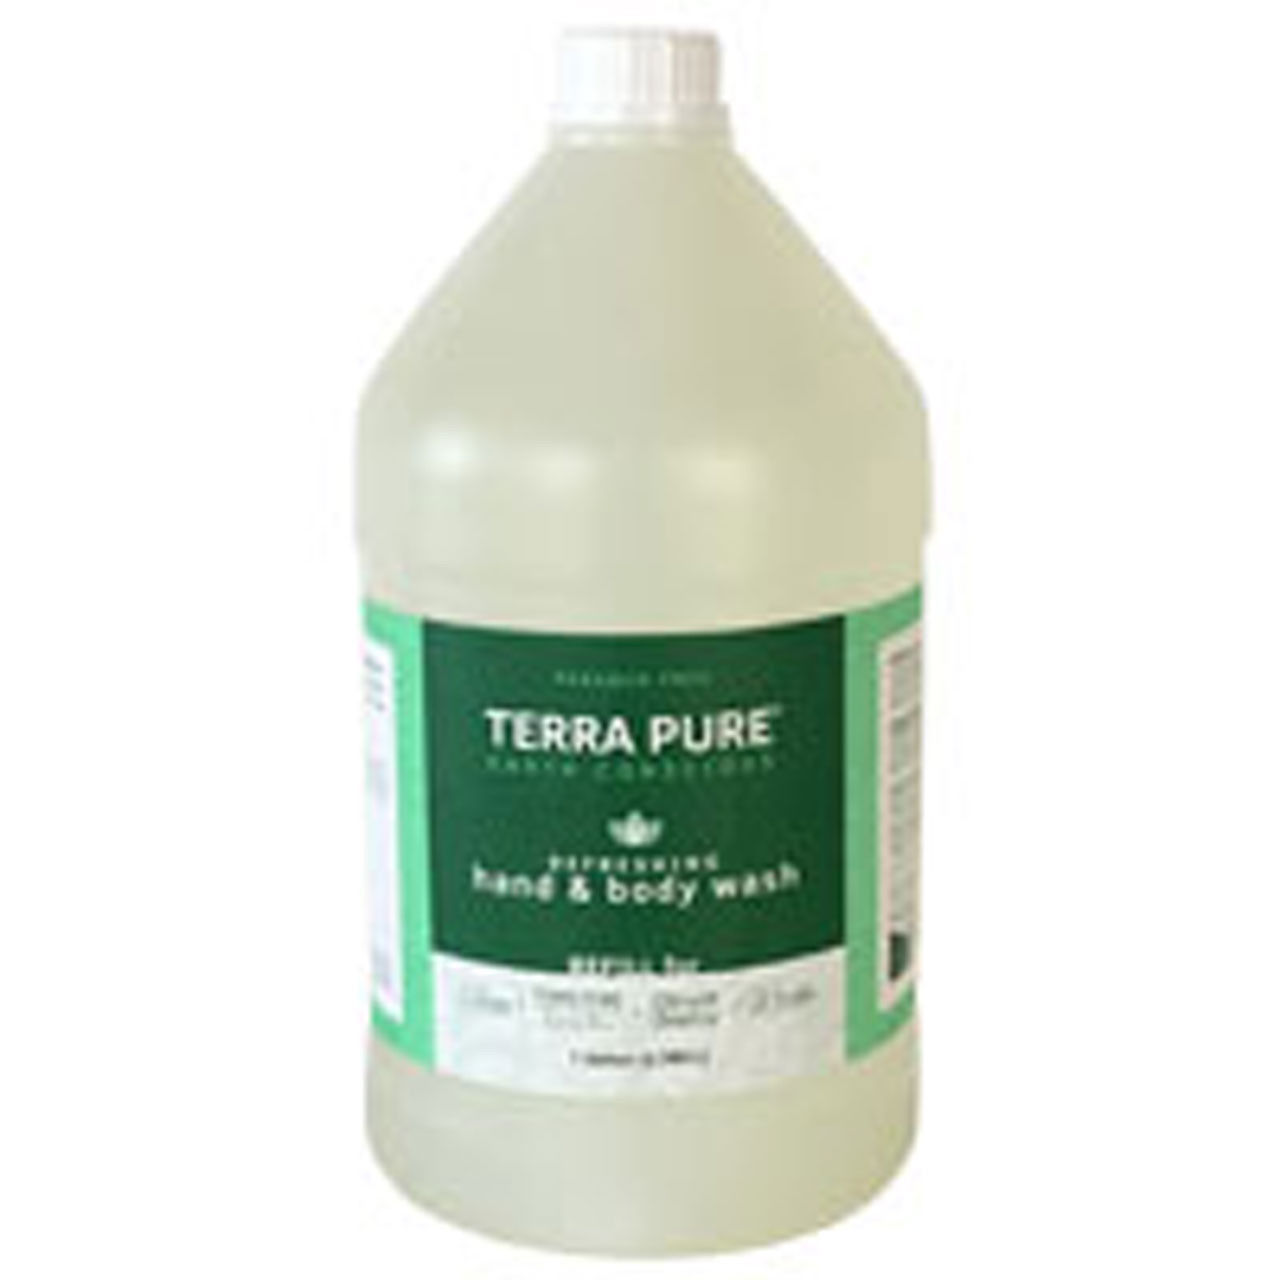 What is the priority of the TERRA PURE GREEN TEA BULK collection in the realm of terra pure?